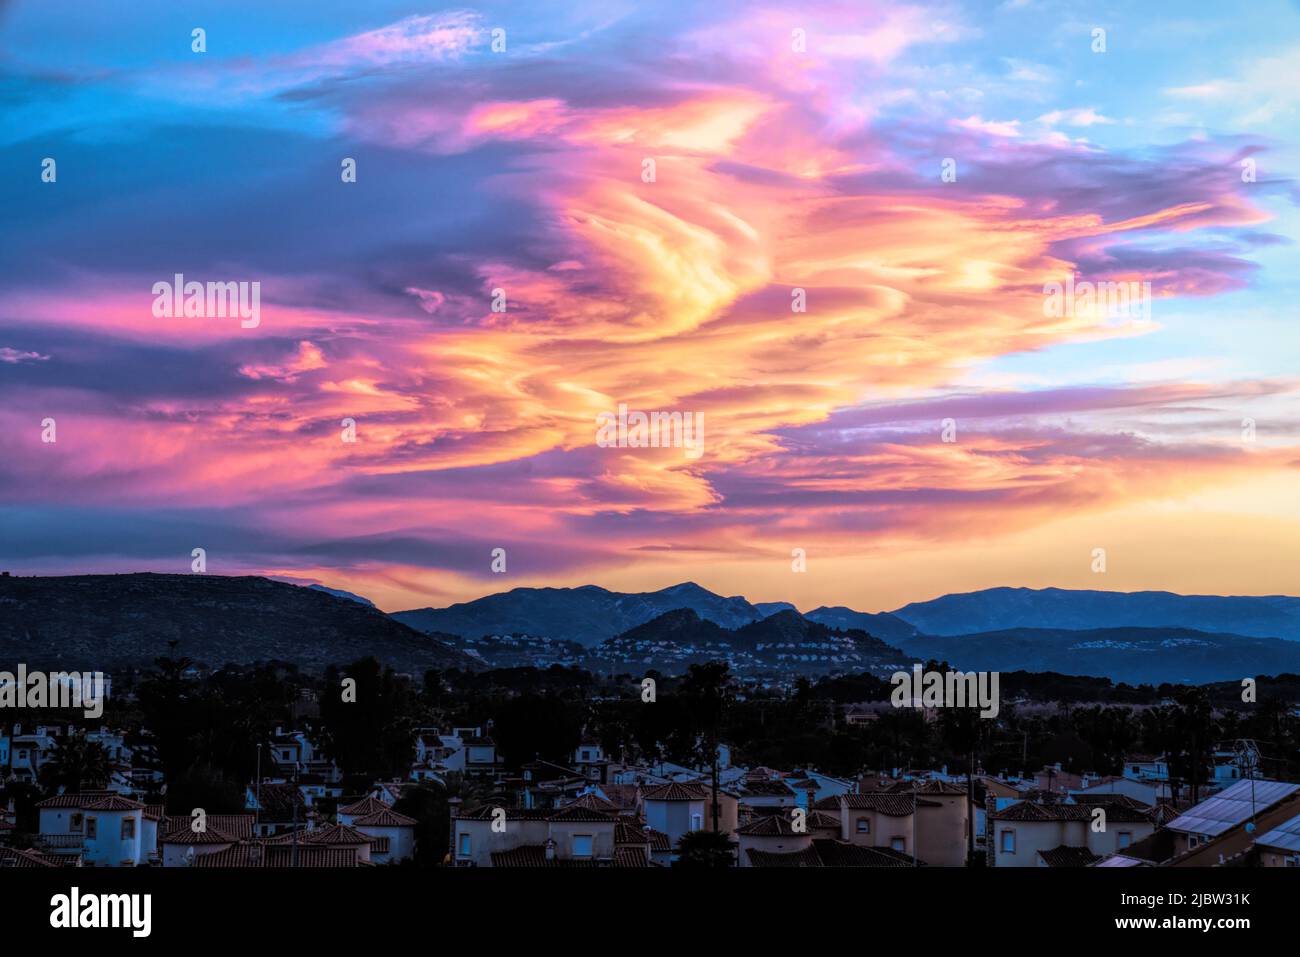 Denia Spain sunset with amazing bright colourful clouds over the mountains Stock Photo